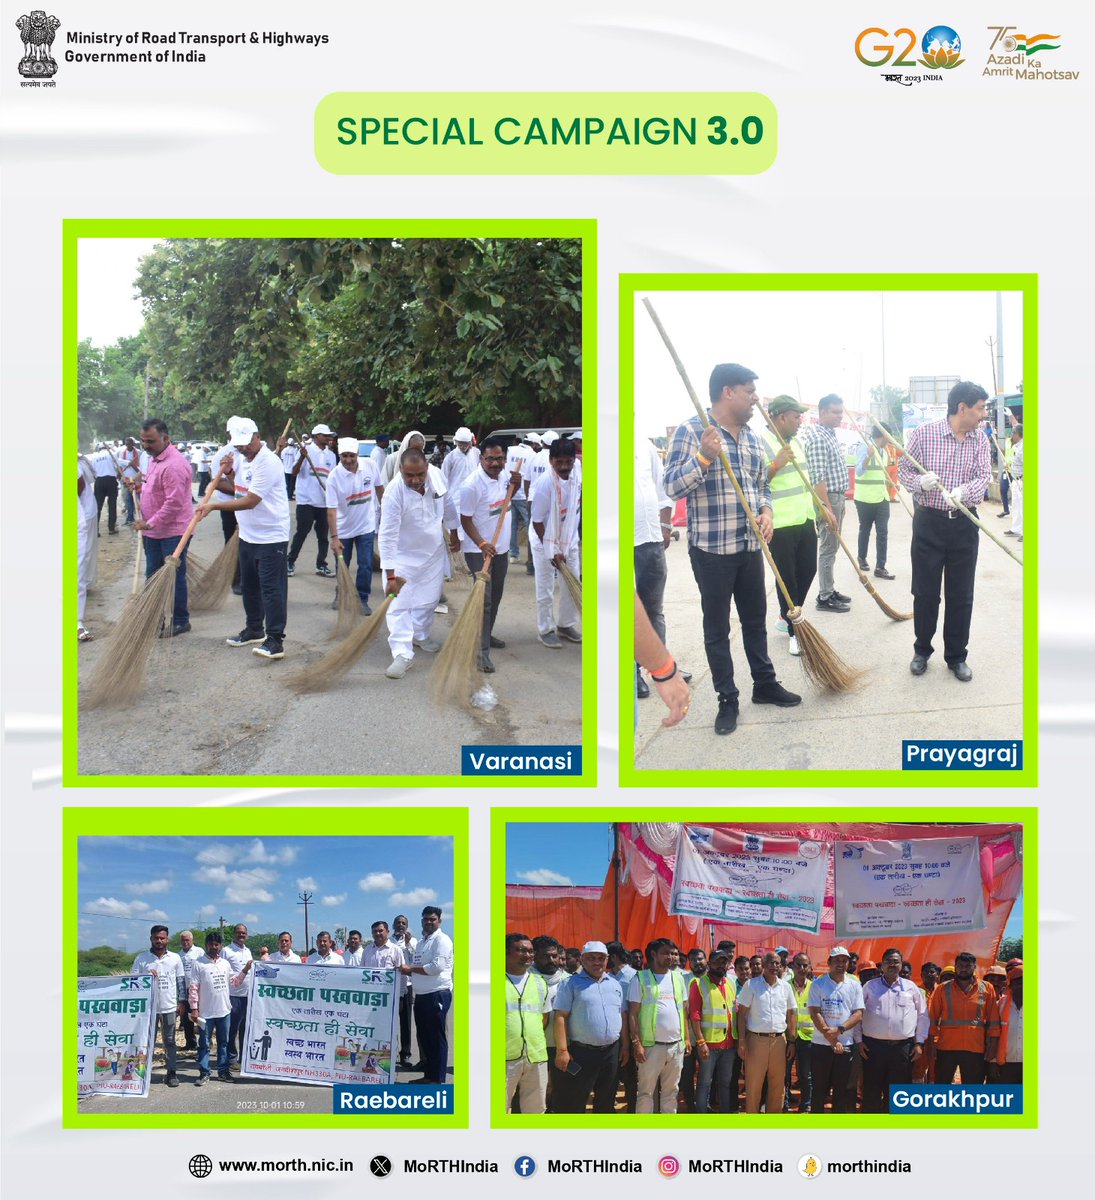 Cleanliness drive being organised by NHAI RO UP (East) at different locations, as part of “Special Campaign 3.0”.
#SpecialCampaign3.0 
#SwachhataCampaign 
#SpecialCampaign